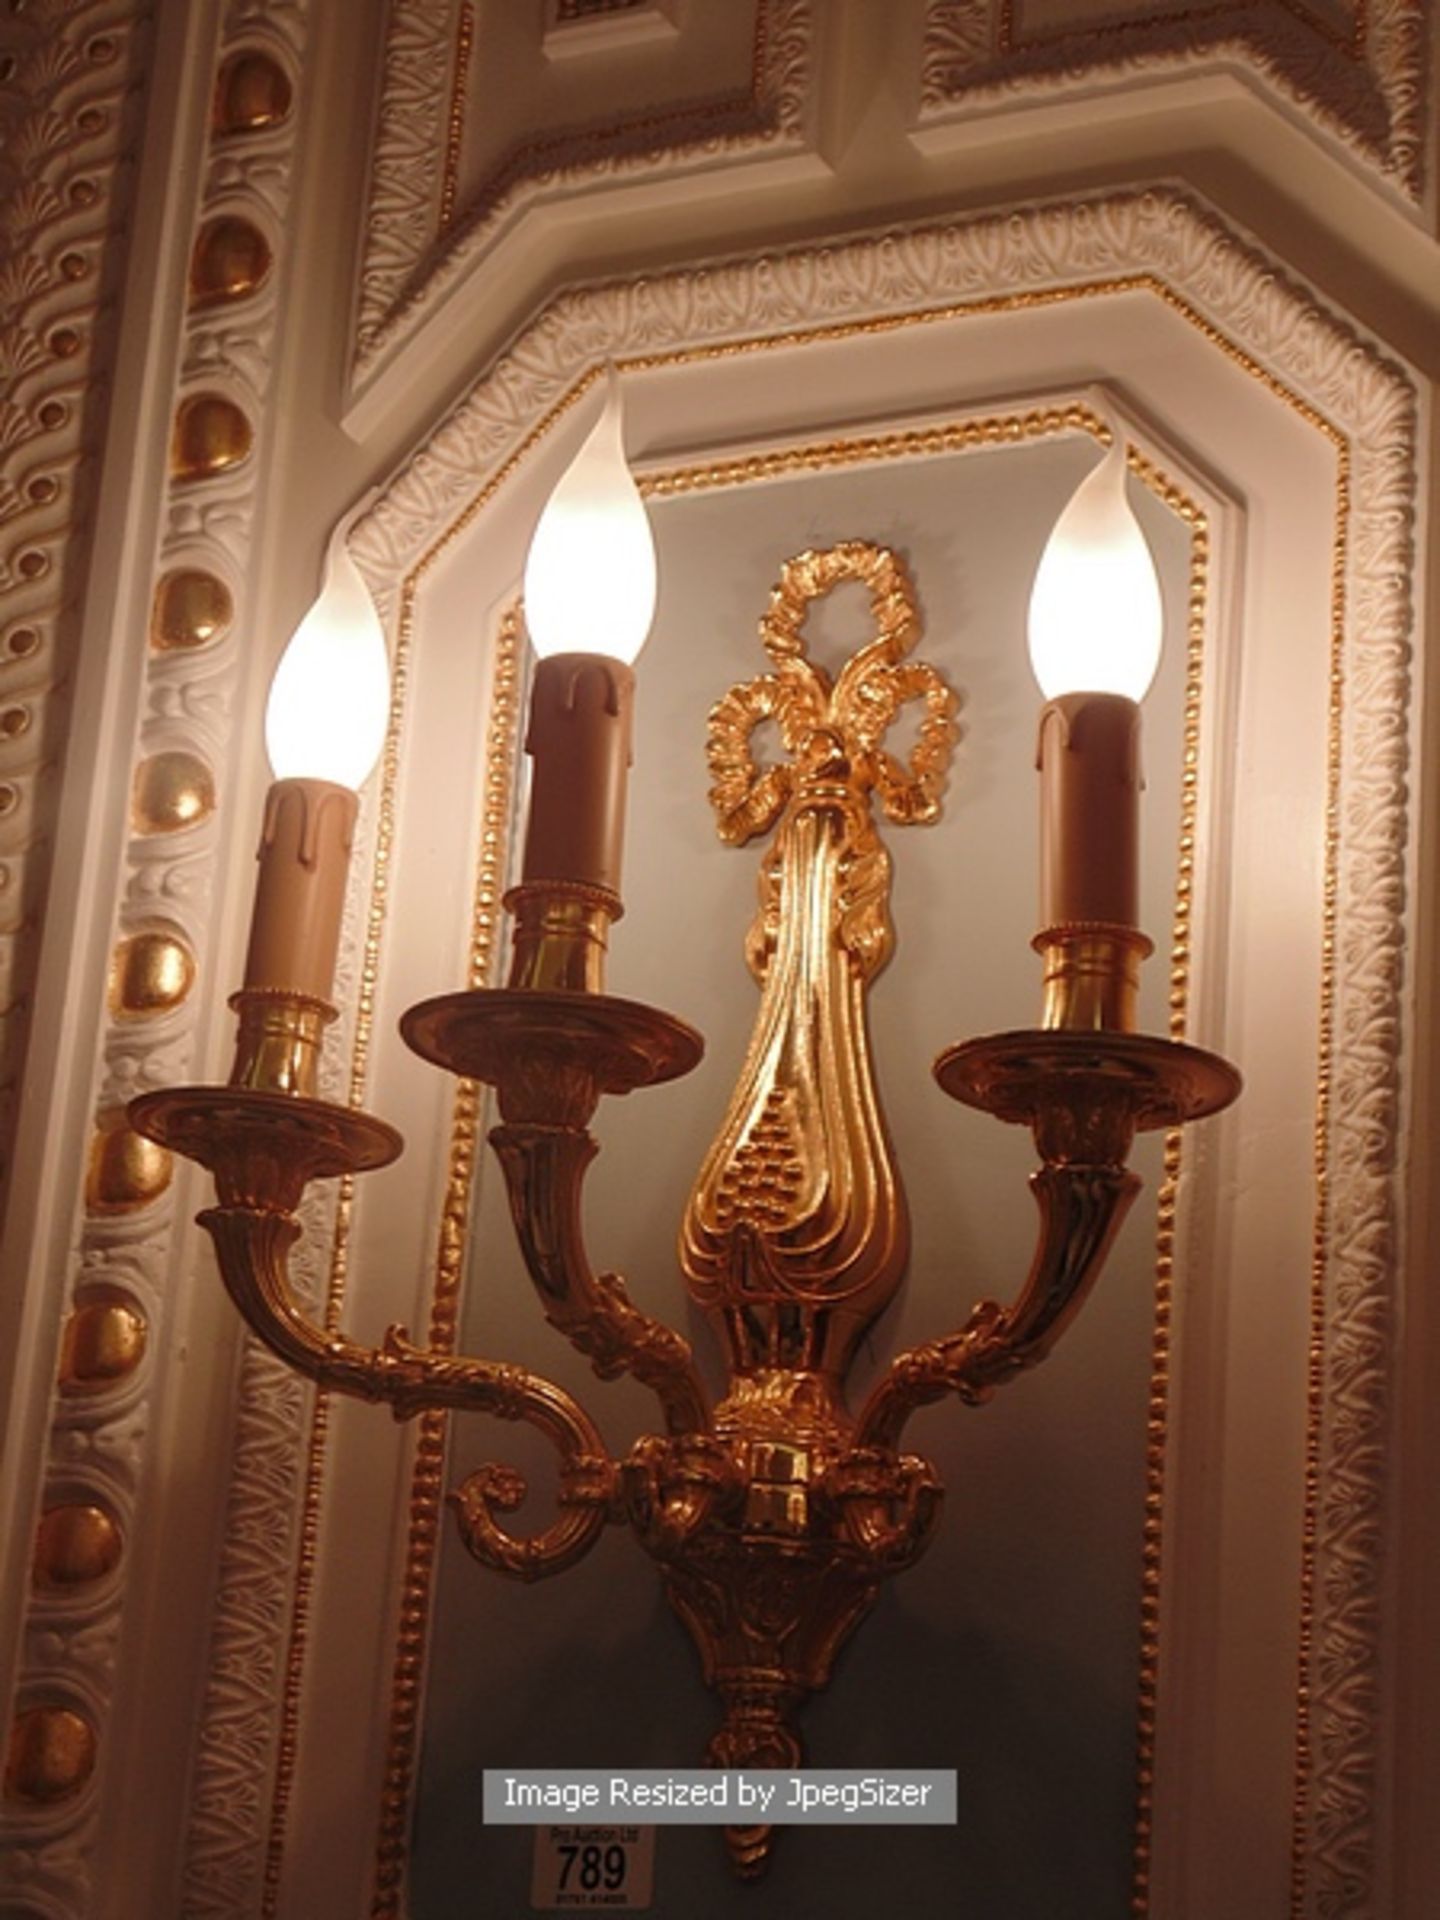 A pair and another single (3 in total) Laudarte wall sconces three candle wall light, bronze - Image 3 of 3